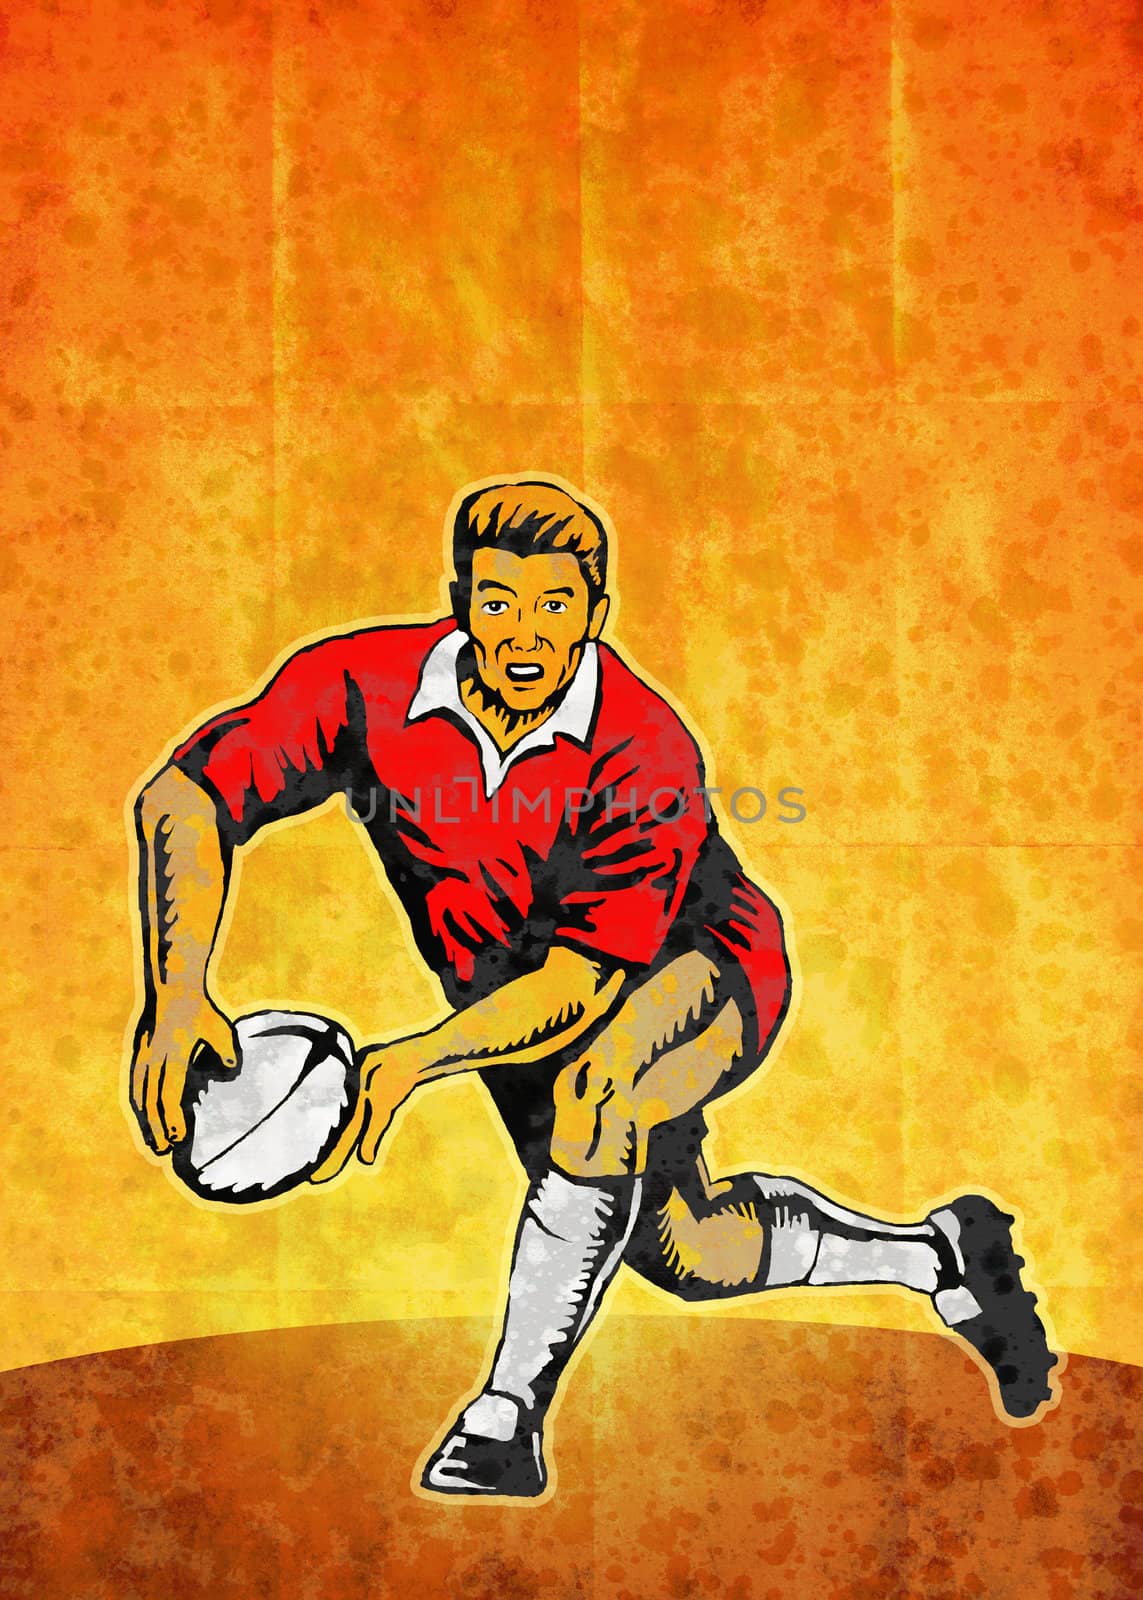 poster illustration of a rugby player running passing with ball with grunge texture background